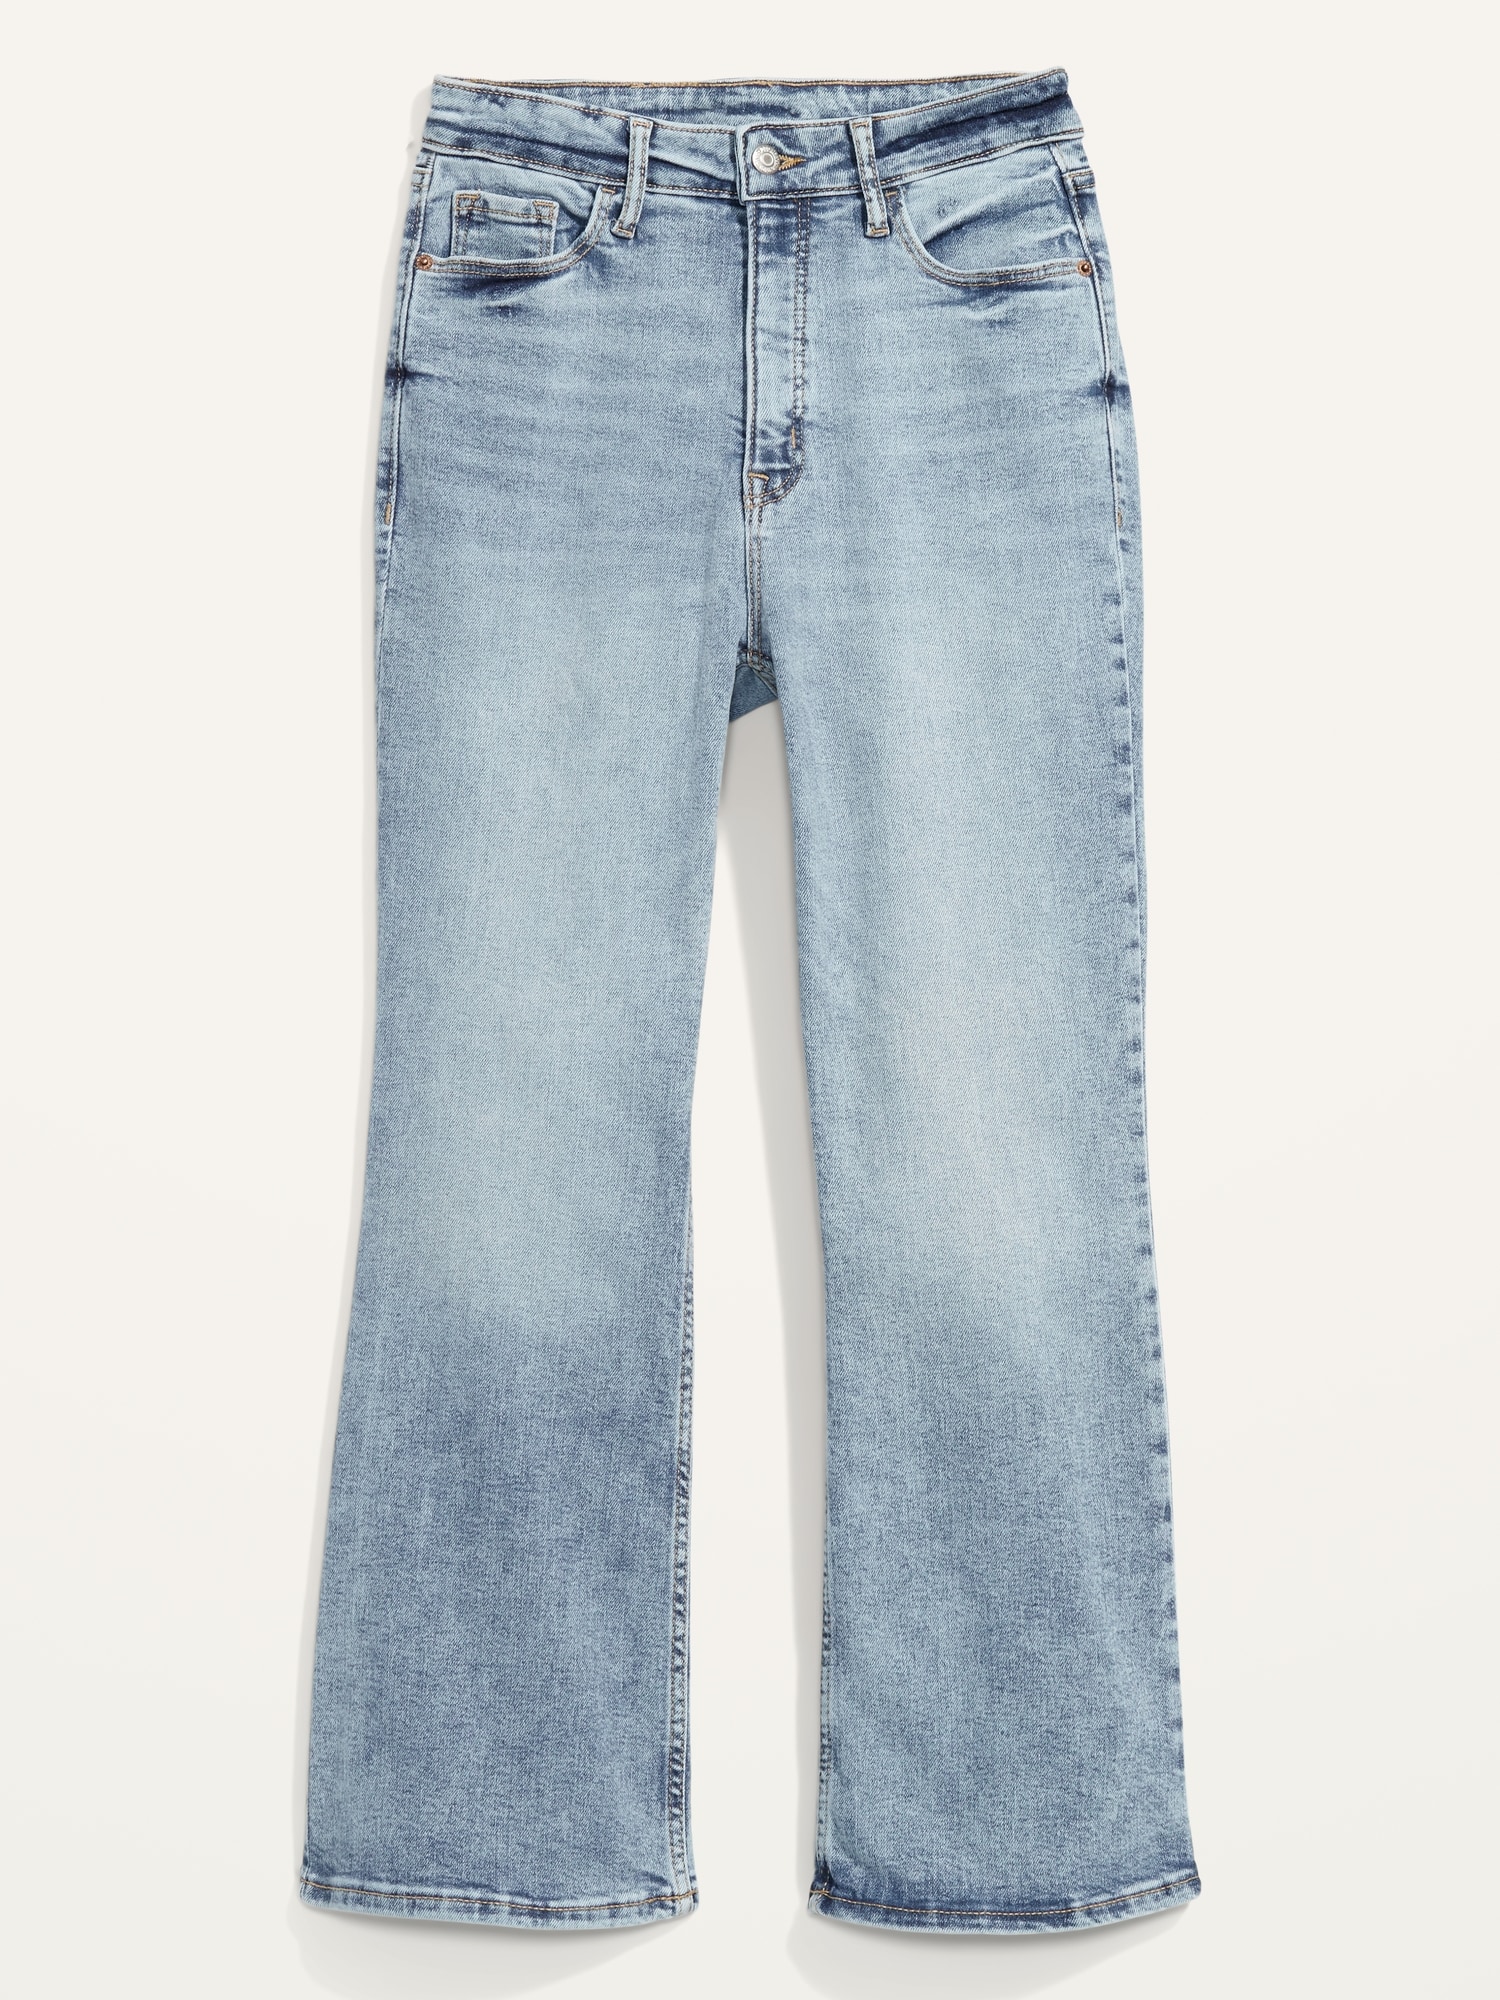 Best Cropped Flare Jeans, 13 Flare Pants From Old Navy for Every Occasion